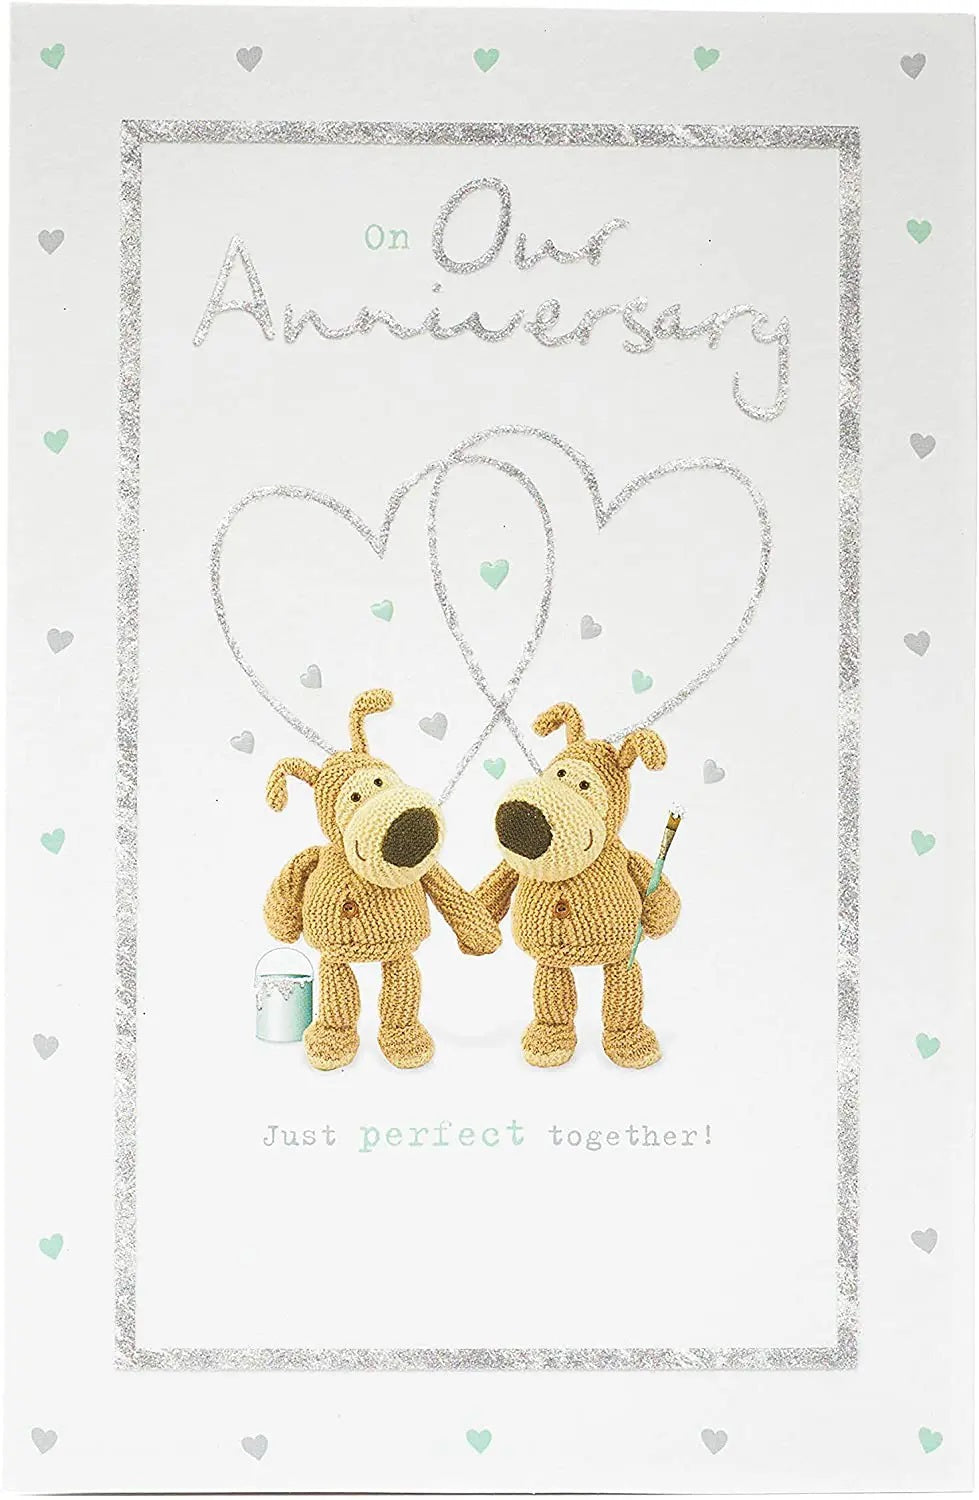 On Our Anniversary Card - Boofles